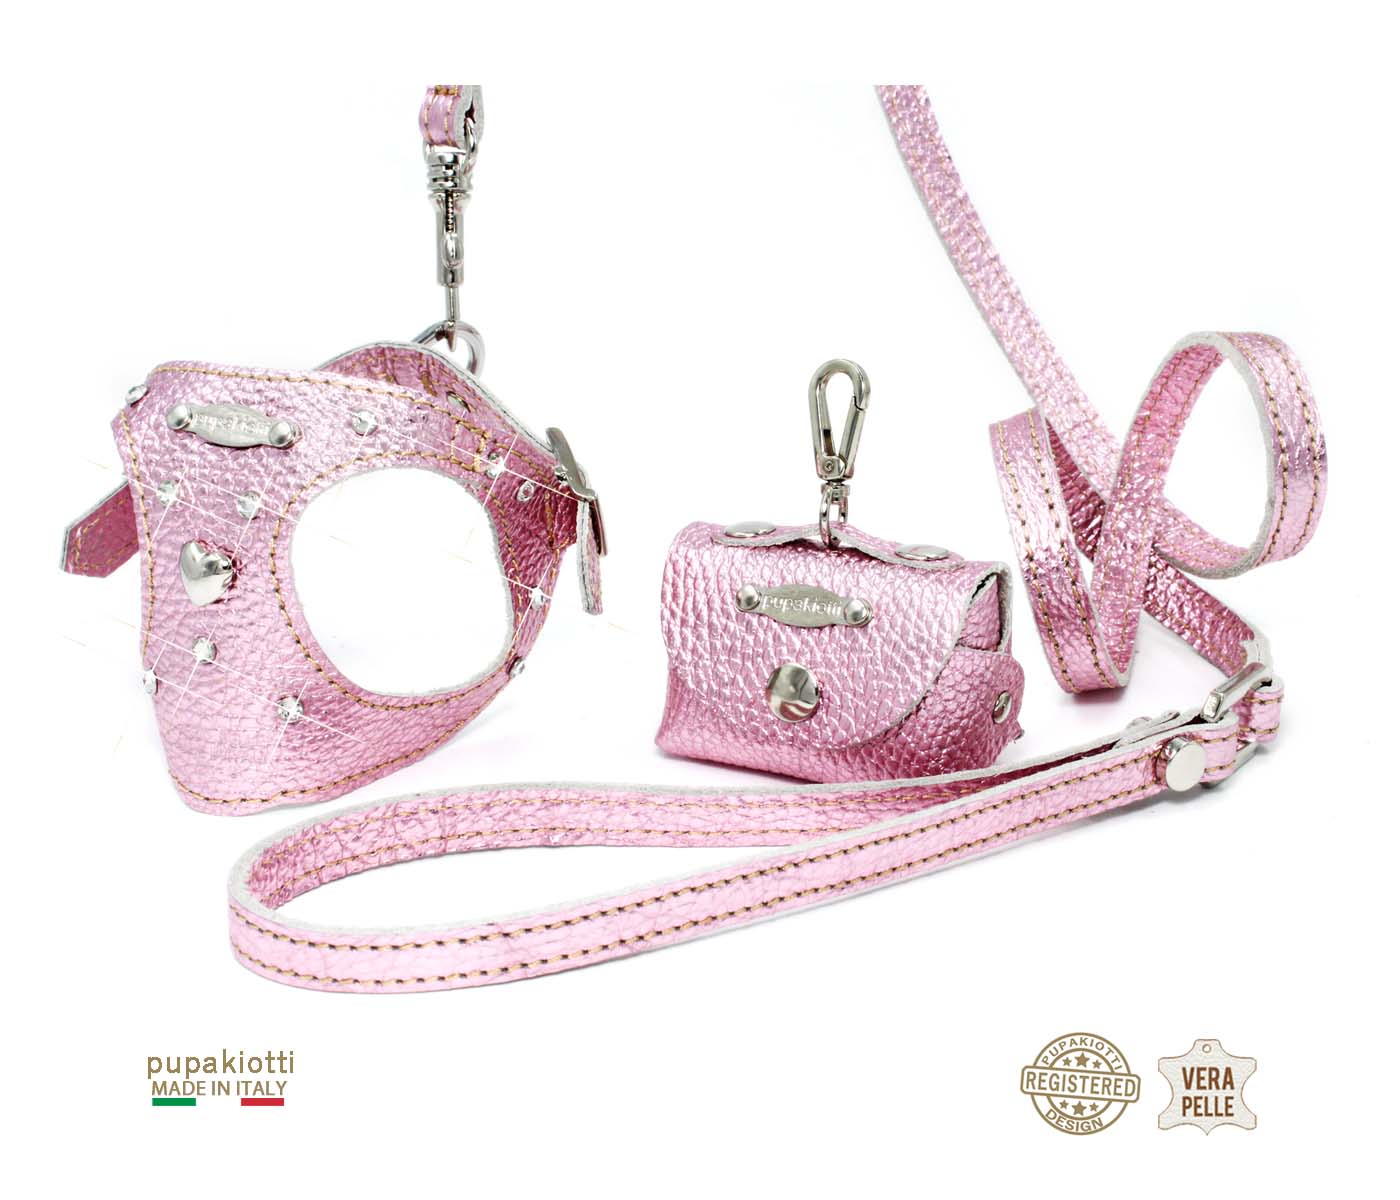 GLAM Swarovski. 3-piece set. Harness and leash with bag holder in leather for dog